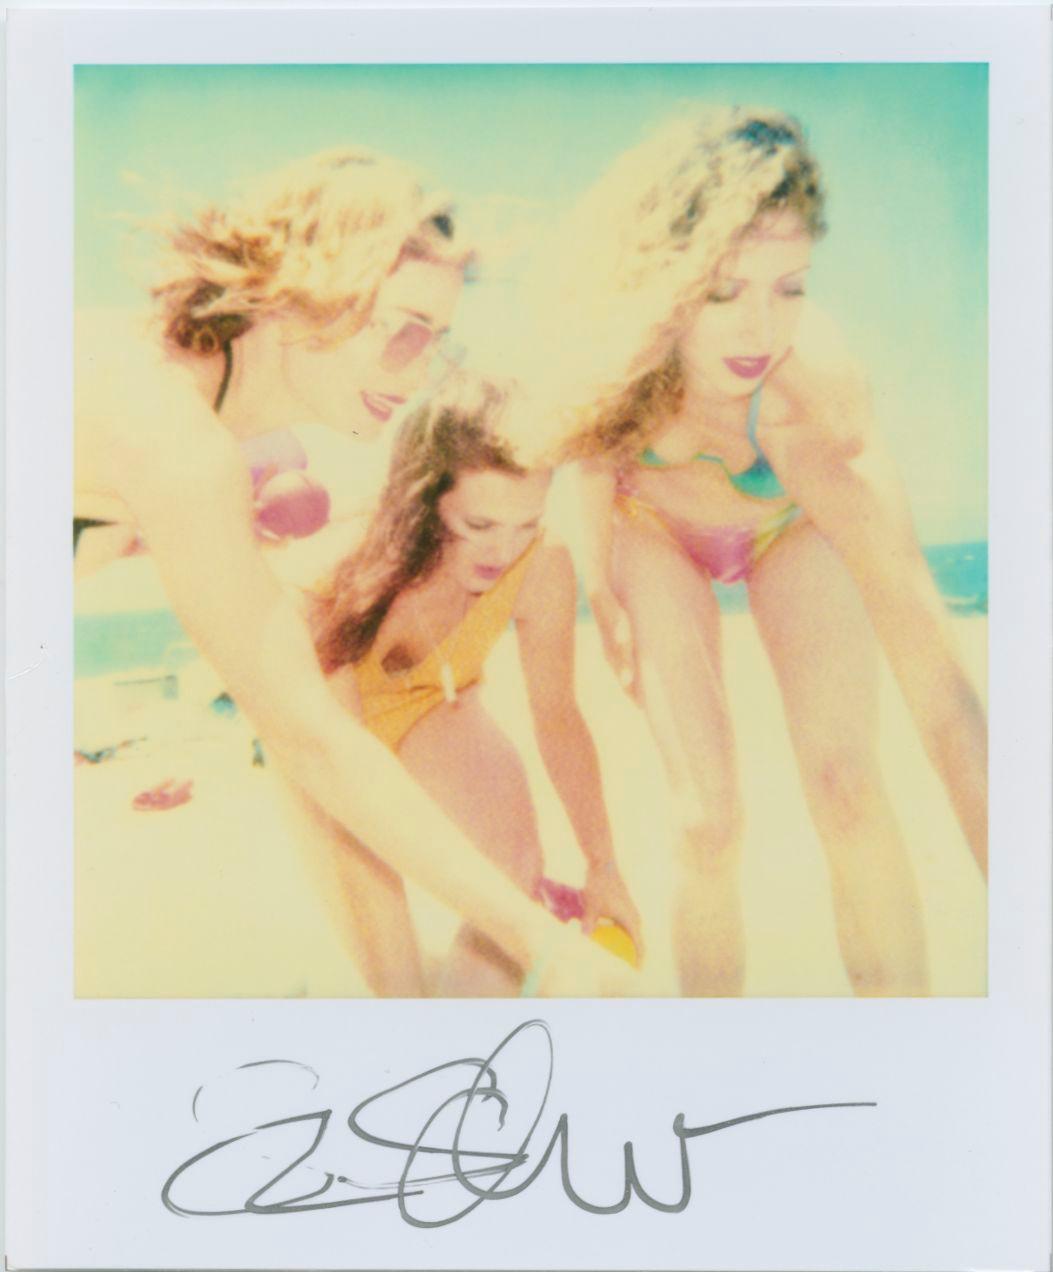 Stefanie Schneider Polaroid sized unlimited Mini 'Beachshoot' - 1999 

signed in front, not mounted. 
1 Digital Color Photograph based on a Polaroid. 

Polaroid sized open Editions 1999-2016
10.7 x 8.8cm (Image 7.9x7.7cm) 

Stefanie Schneider